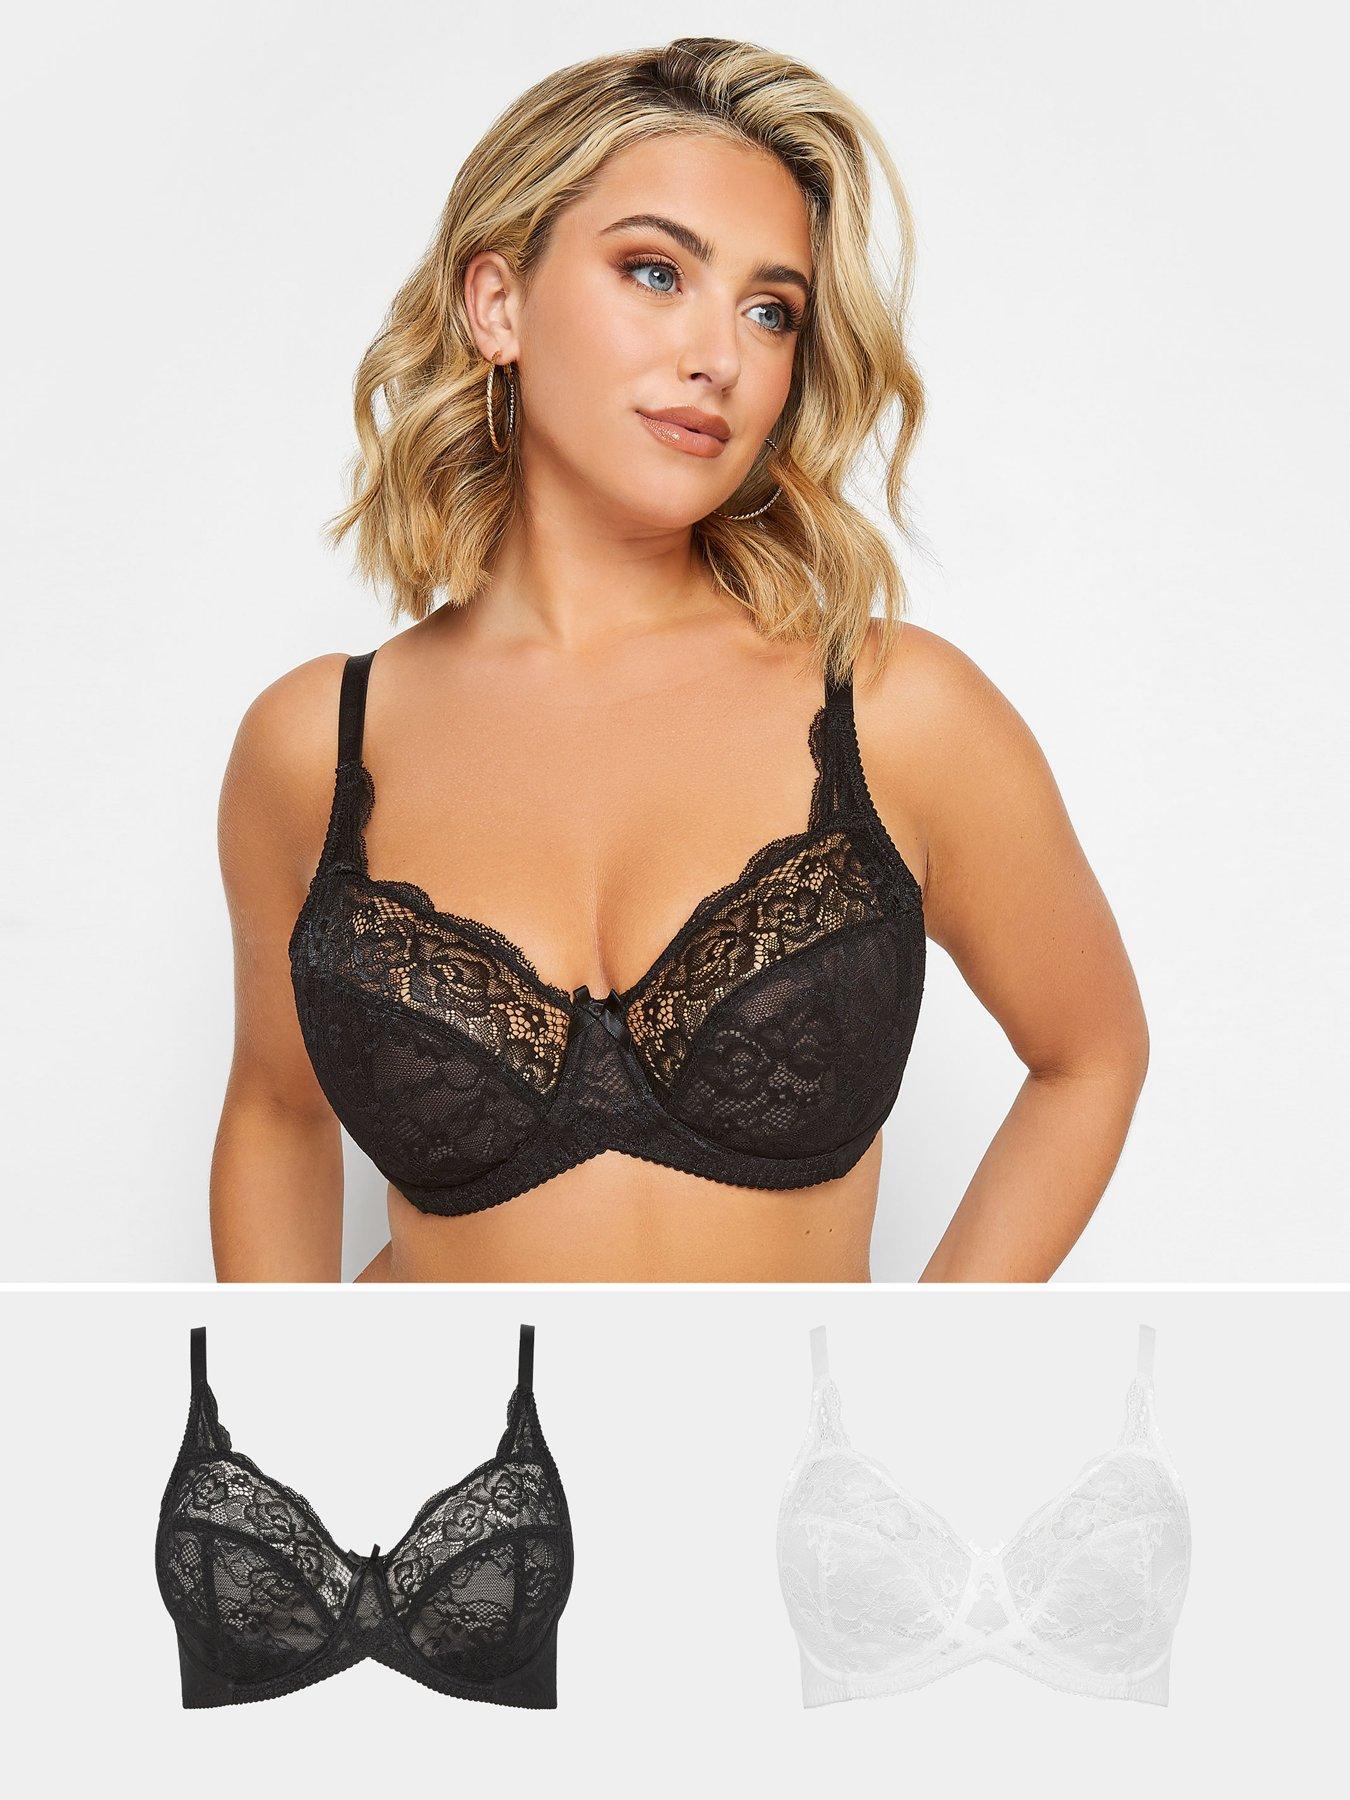 34% off on 2x Lace Trim Dainty Bralettes